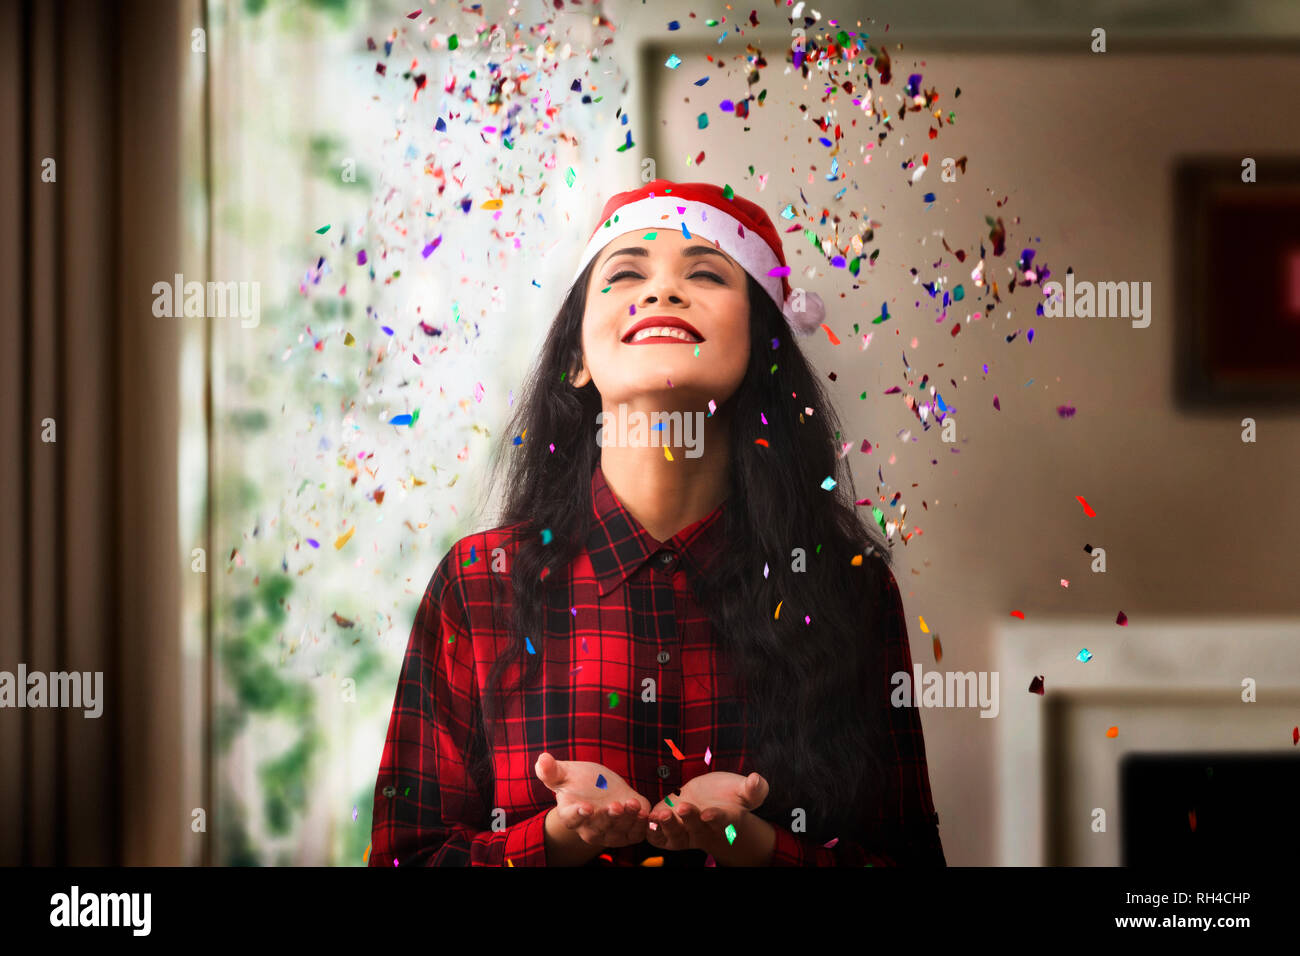 Close-Up Of Smiling Young Woman Throwing Confetti While Standing At Home During Christmas Stock Photo